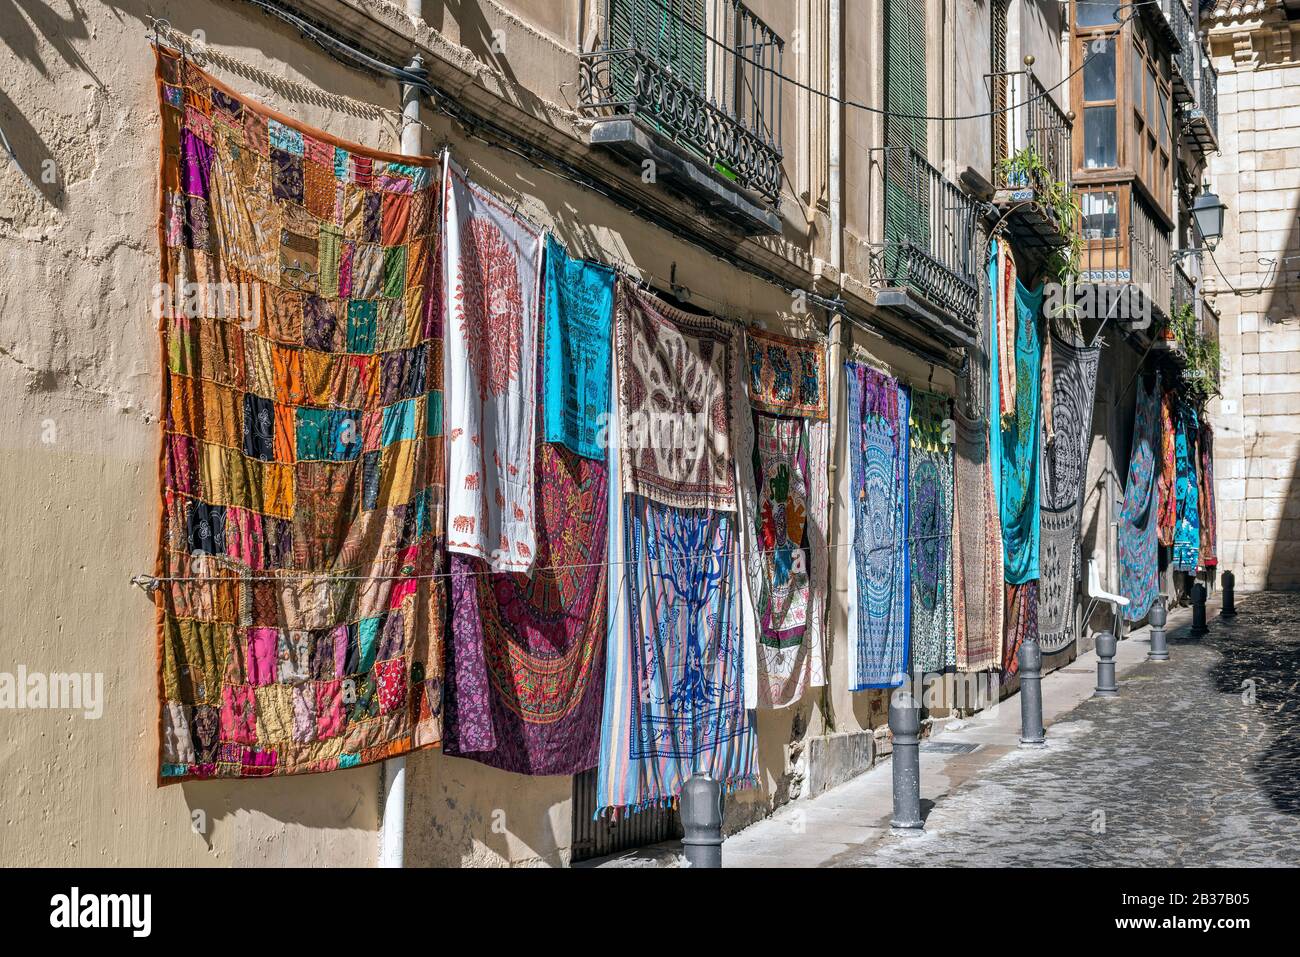 Rugs of various colors hanging on the wall in a street. Stock Photo